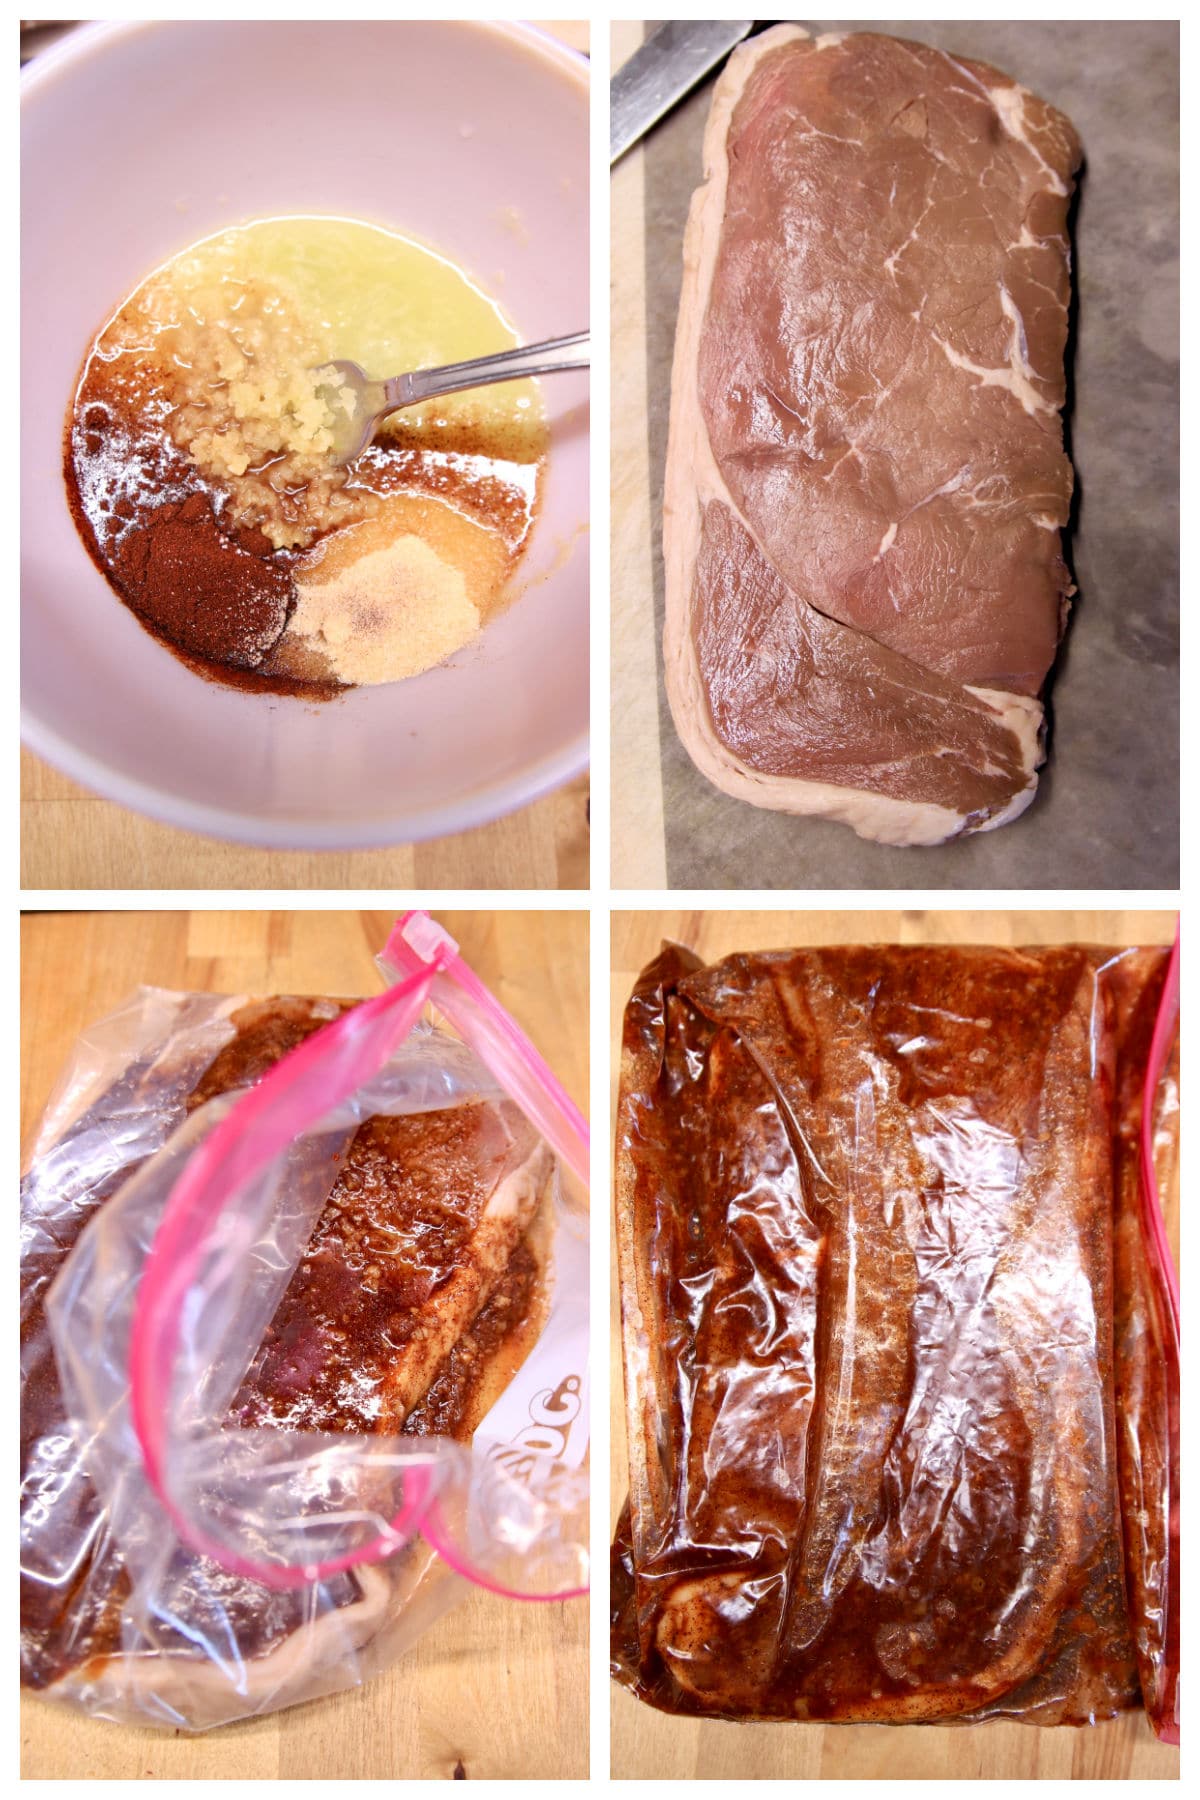 Collage making marinade for steak - marinating in a ziploc bag.